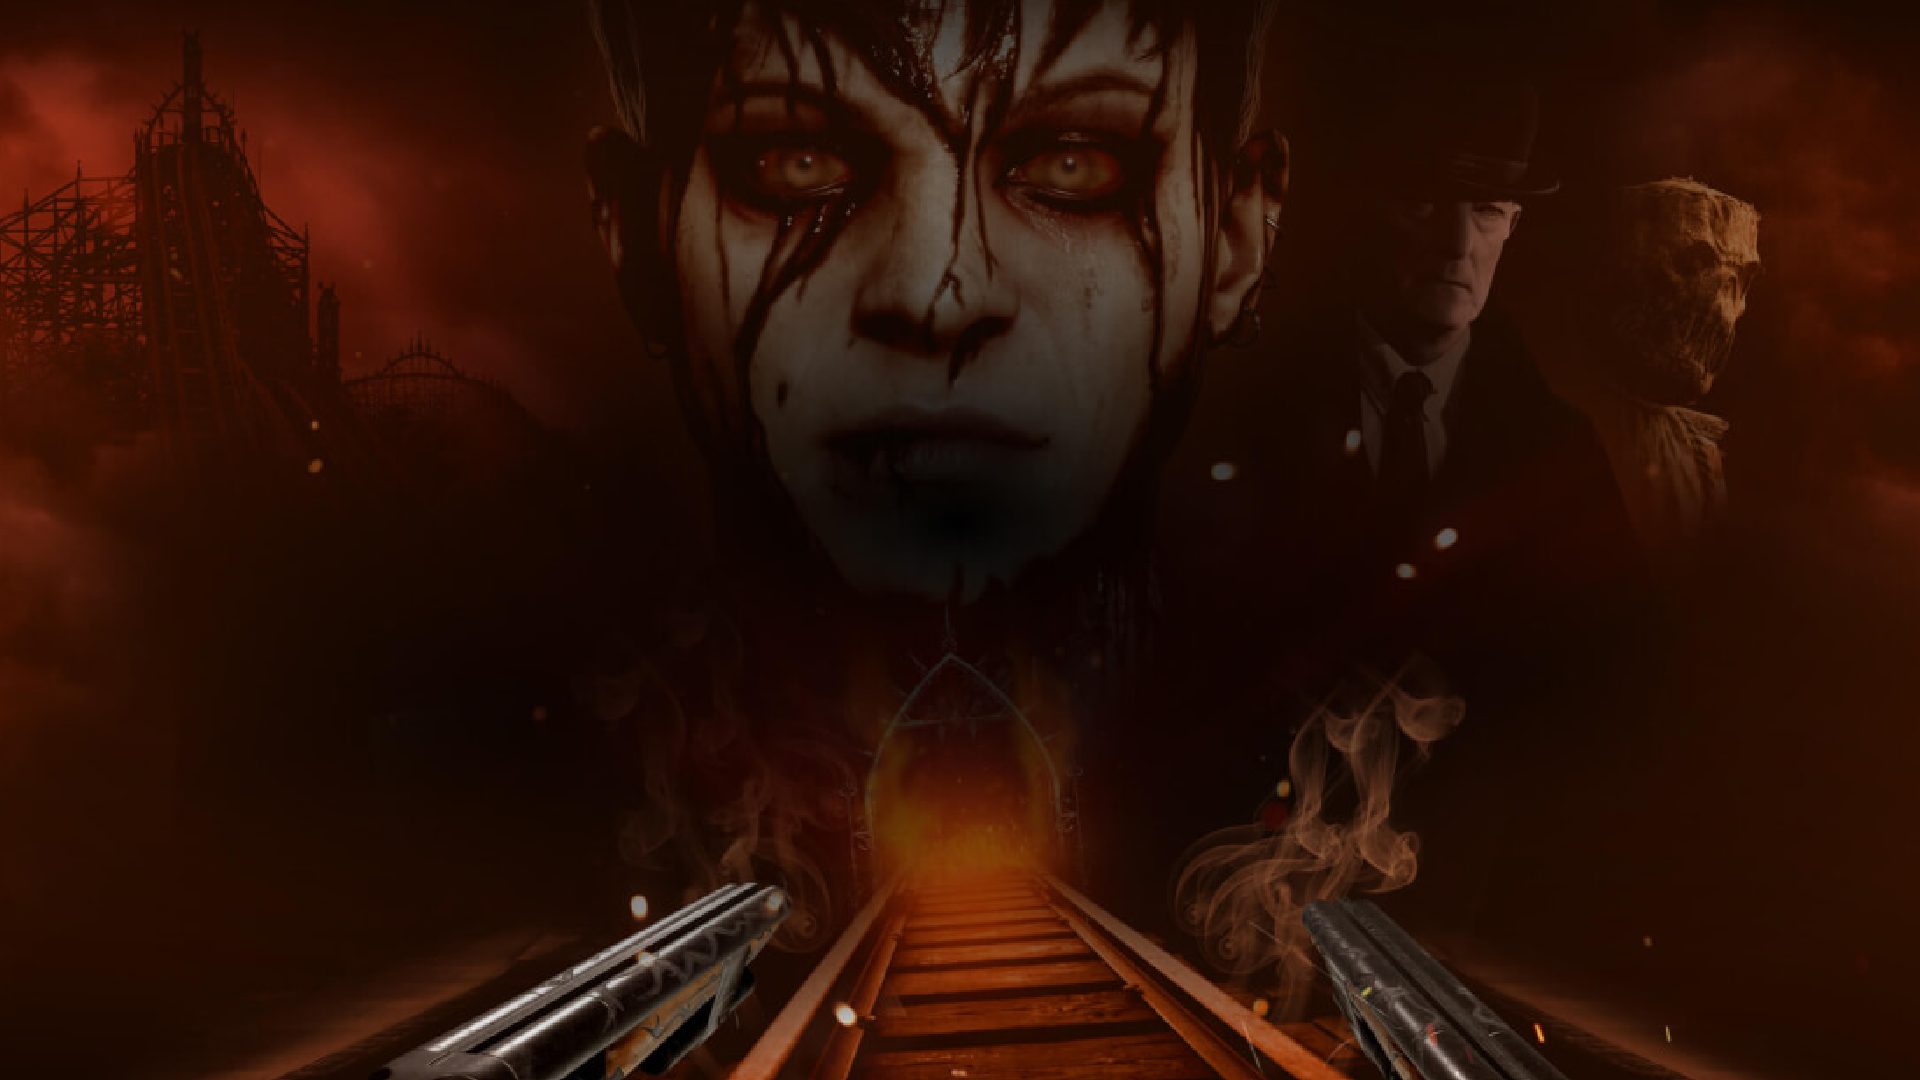 The Dark Pictures VR Switchback: An image of two guns and a large head can be seen